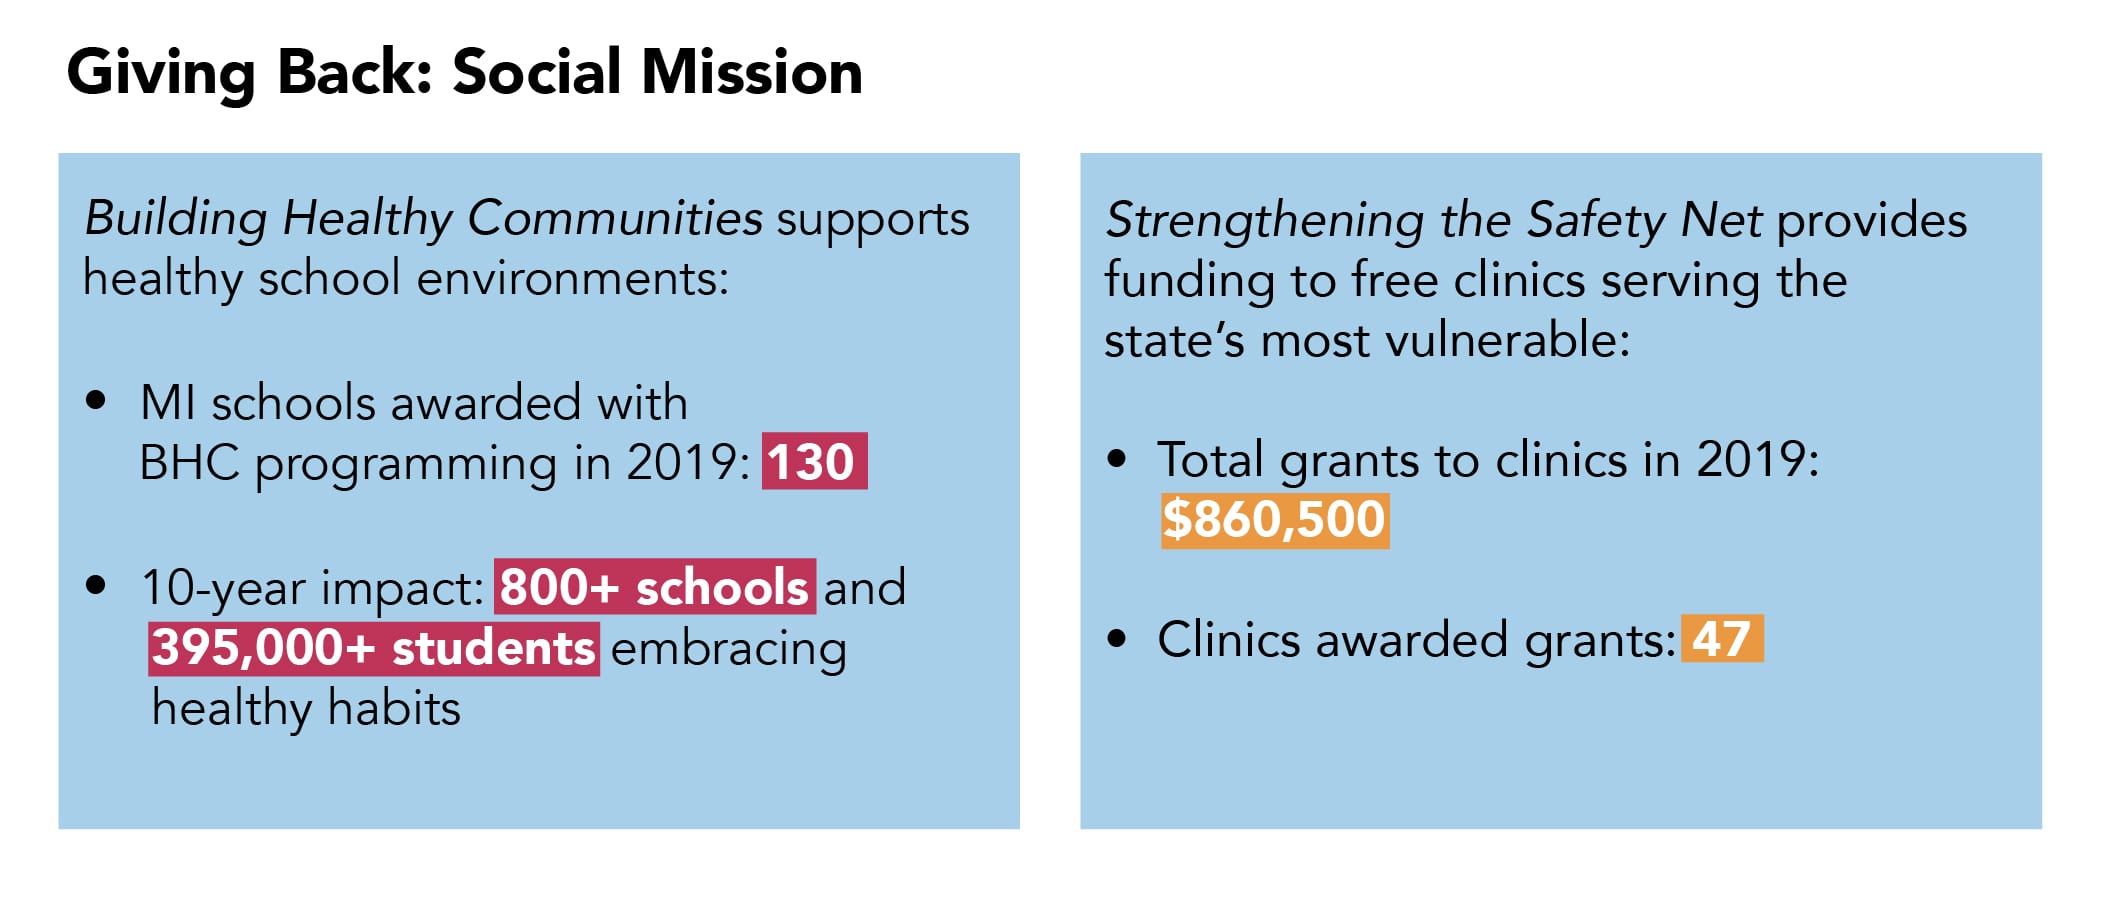 Graphic: Giving Back: Social Mission; Building Healthy Communities supports healthy school environments: • MI schools awarded with BHC programming in 2019: 130 • 10-year impact: 900+ schools and 395,000+ students embracing healthy habits; Strengthening the Safety Net provides funding to clinics serving the state’s most vulnerable: • Total grants to clinics in 2019: $860,500 • Clinics awarded grants: 47